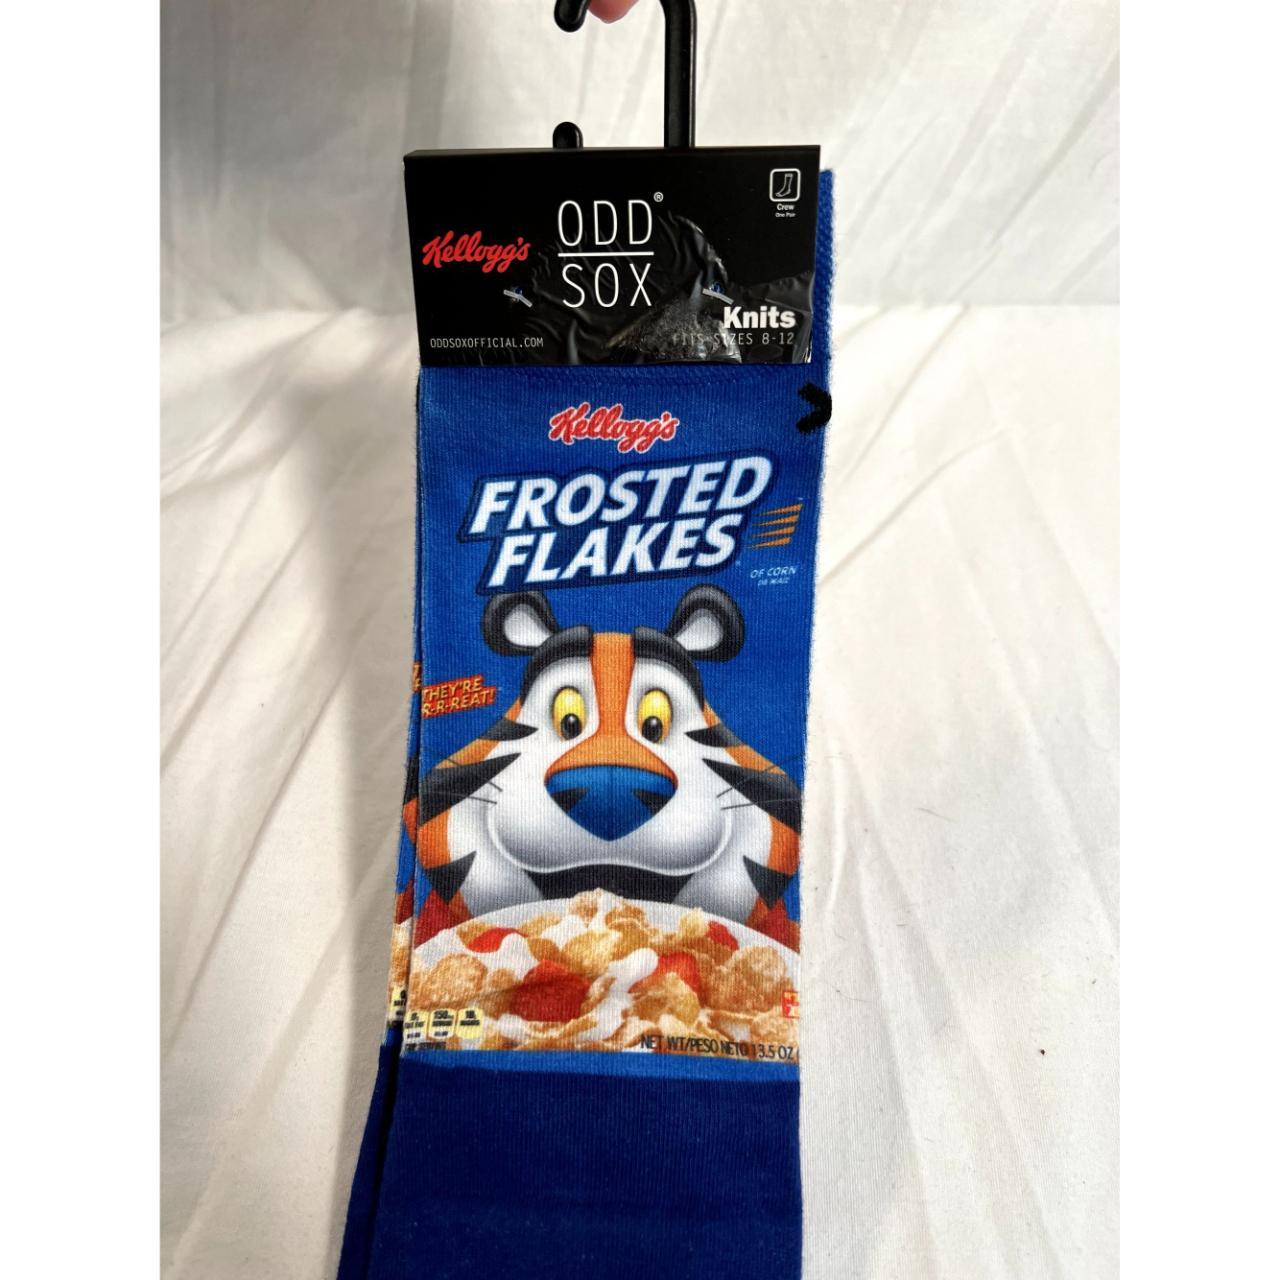 Odd Sox Men's Frosted Flakes